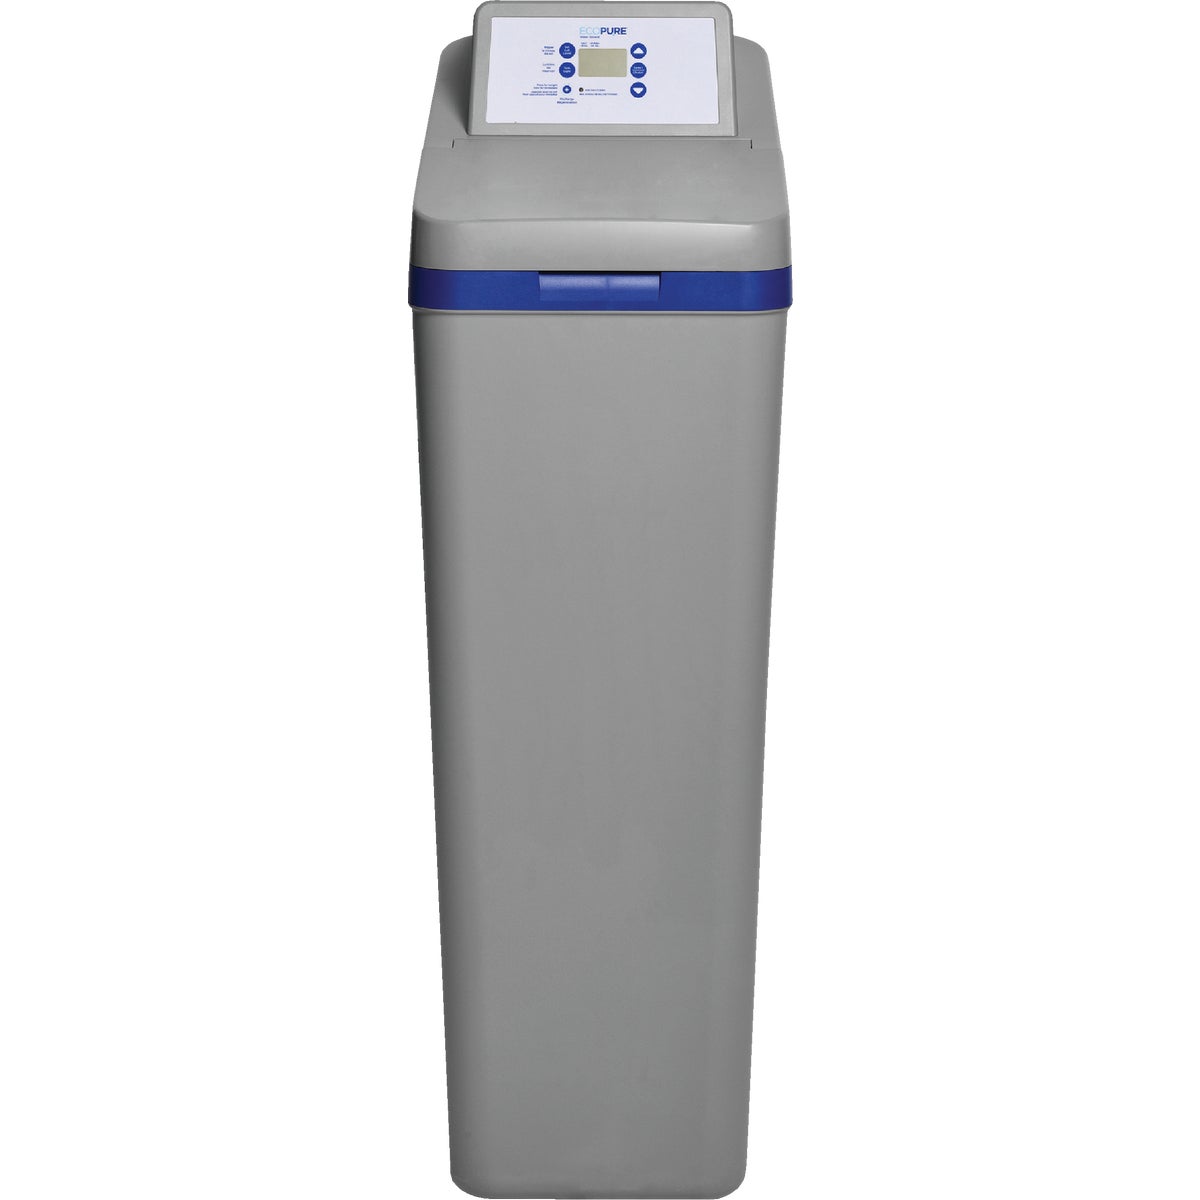 Item 400411, Enjoy all the benefits of clean tap water in your home with the EcoPure 